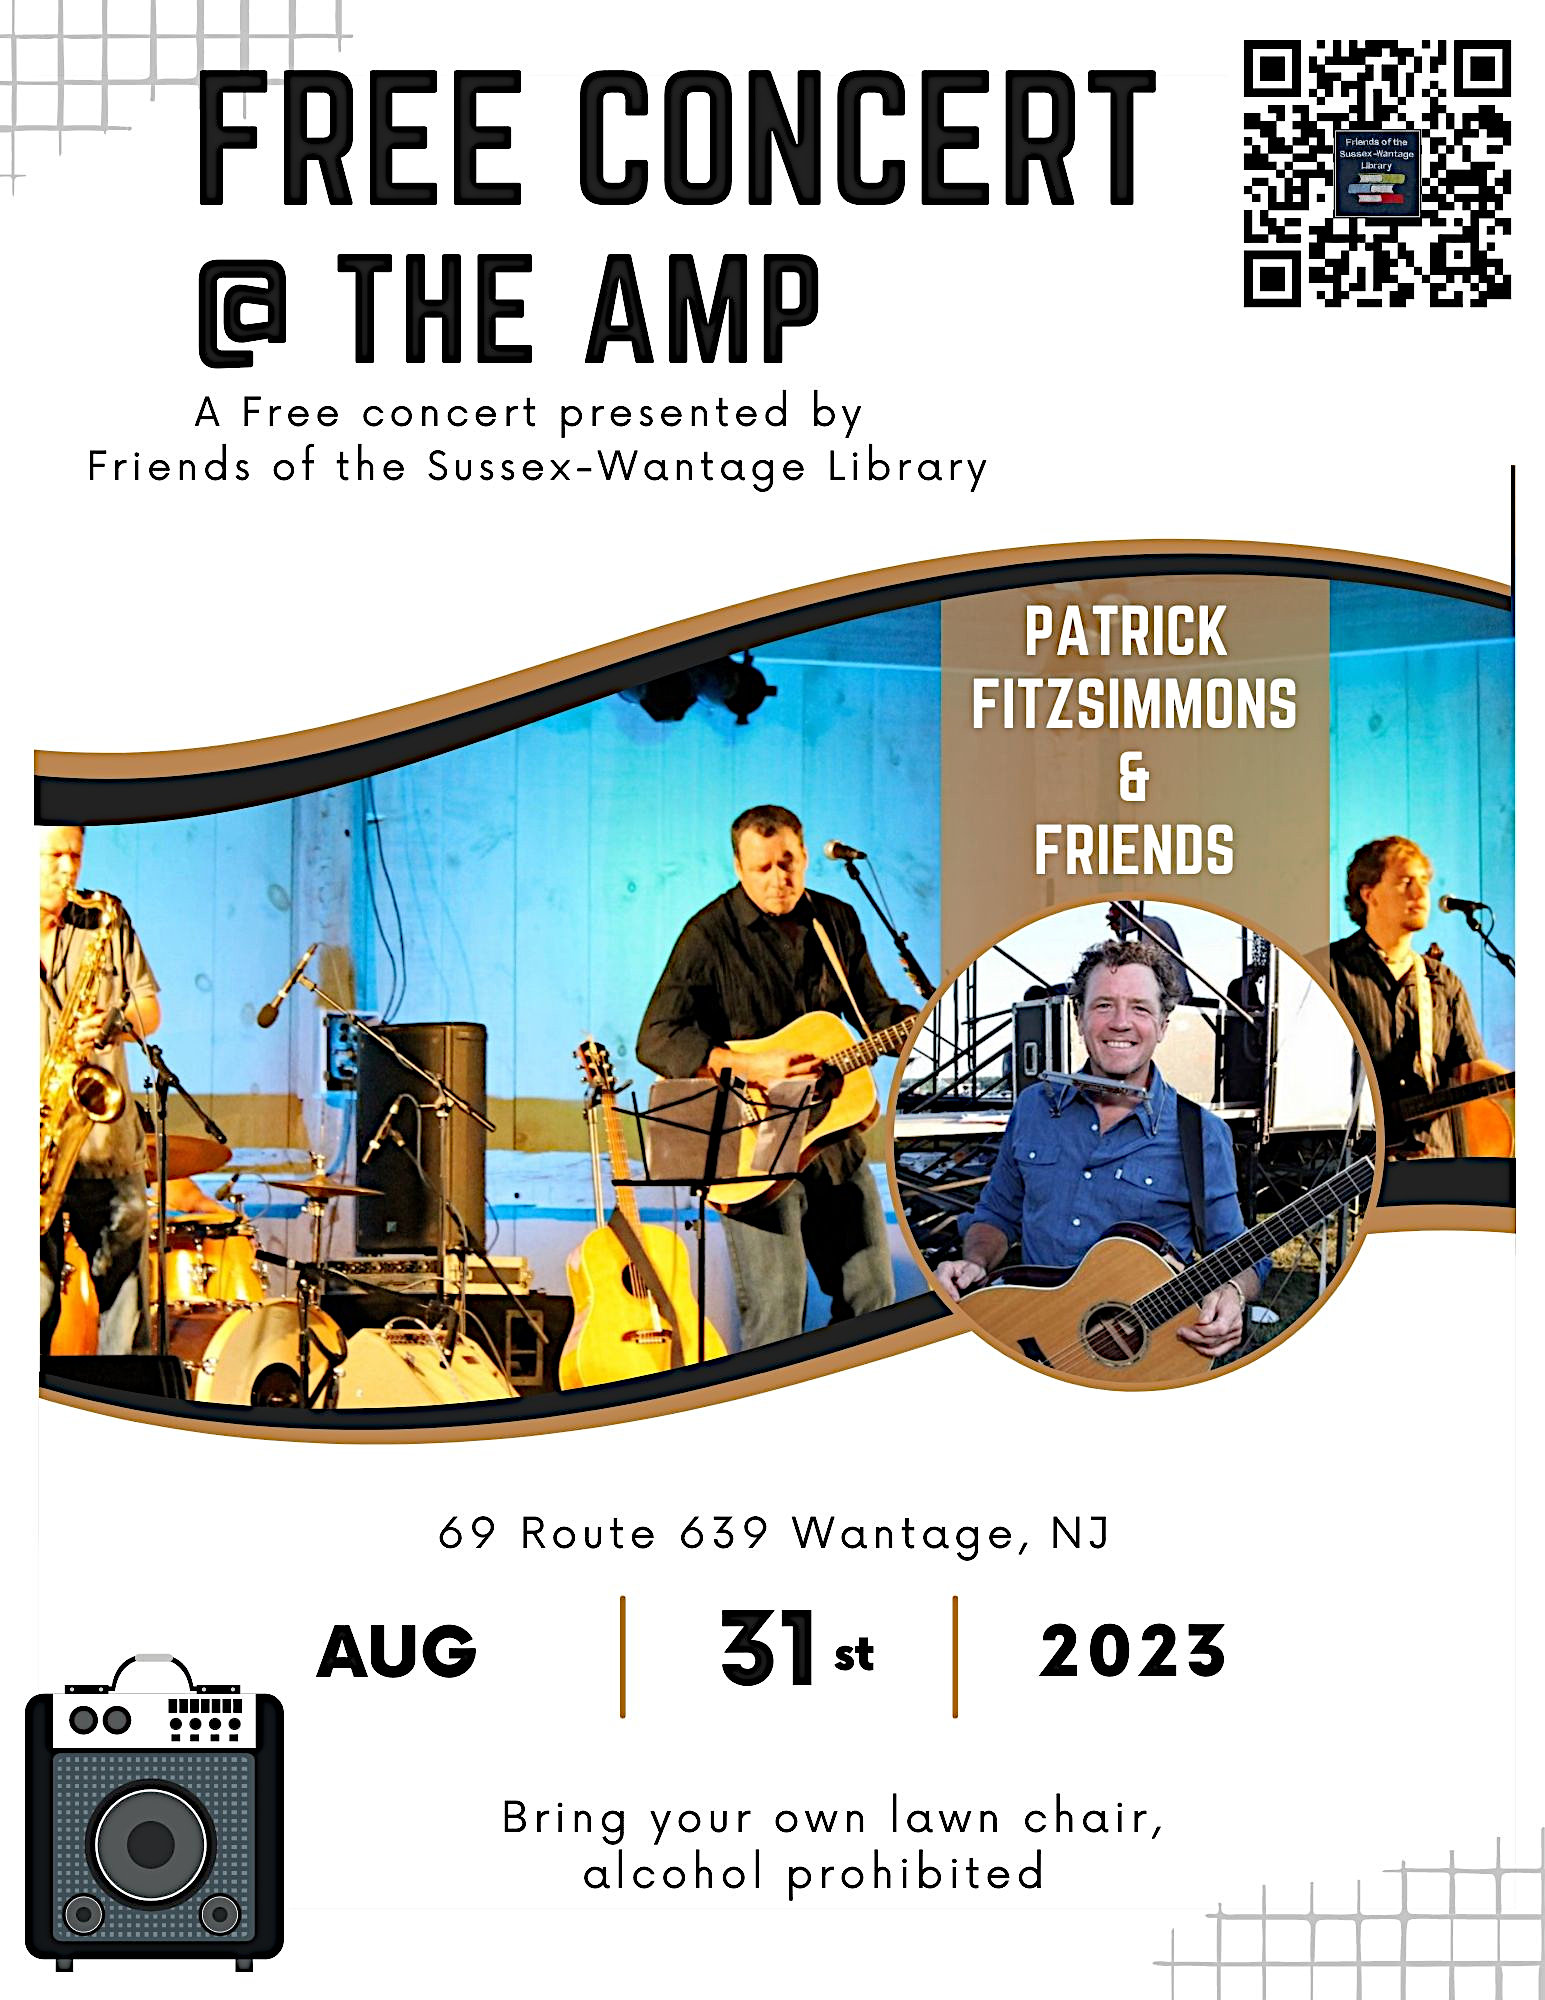 patrick fitzimmons and friends